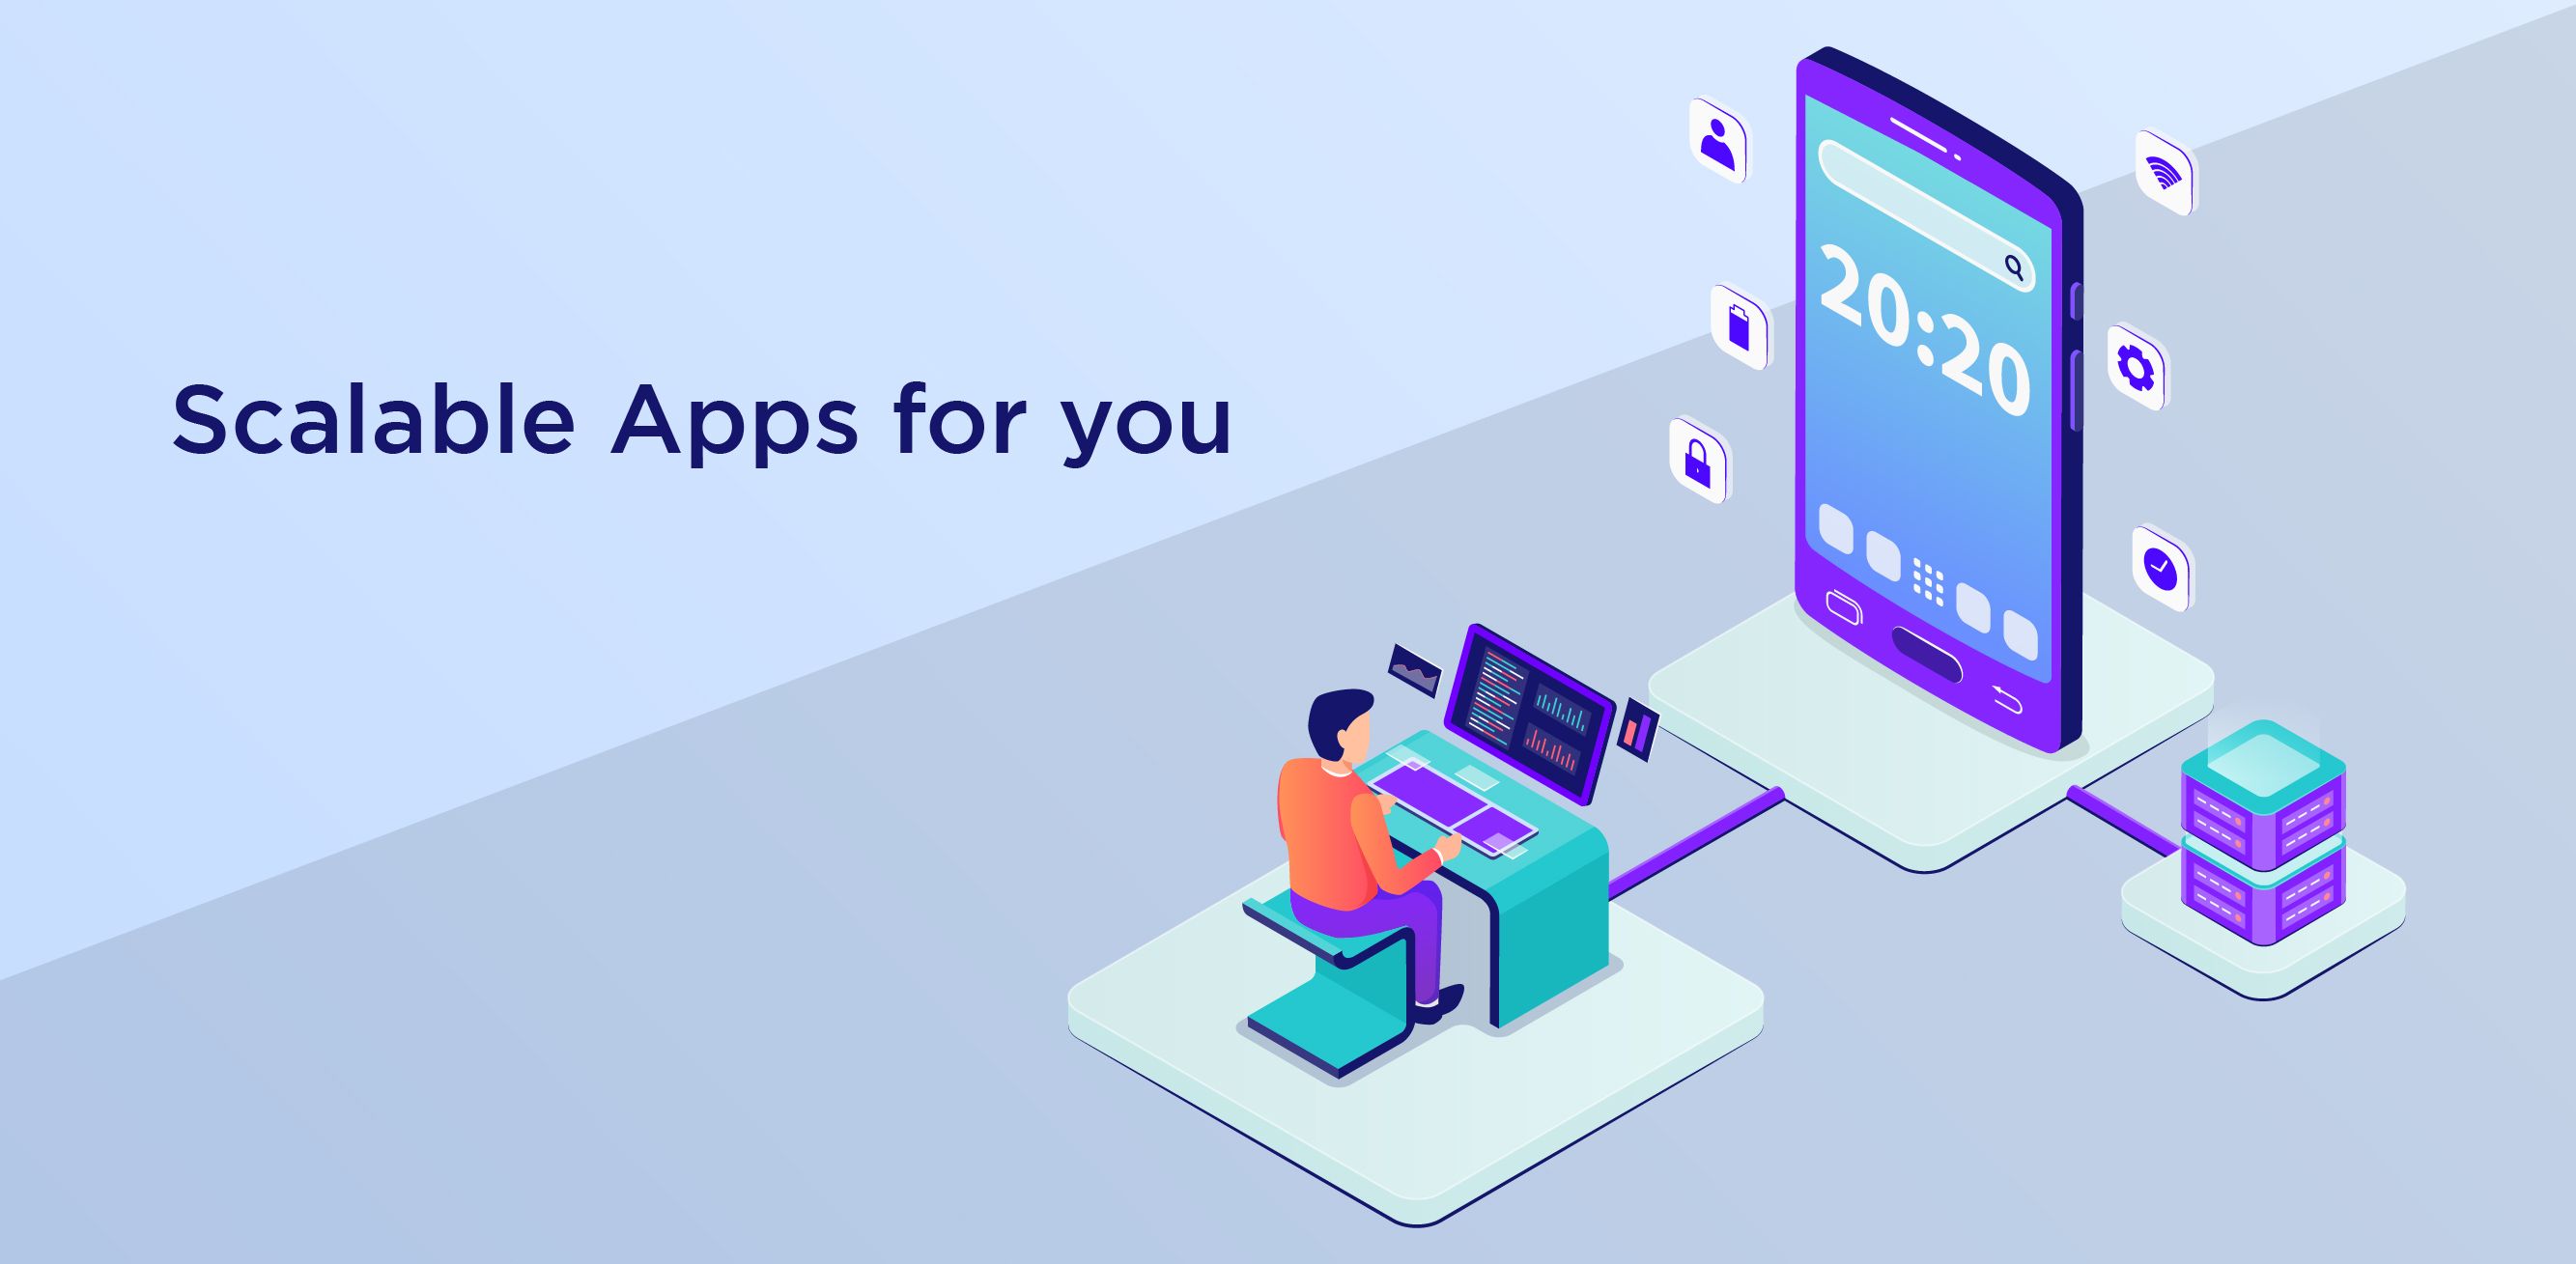 Scalable Apps for you